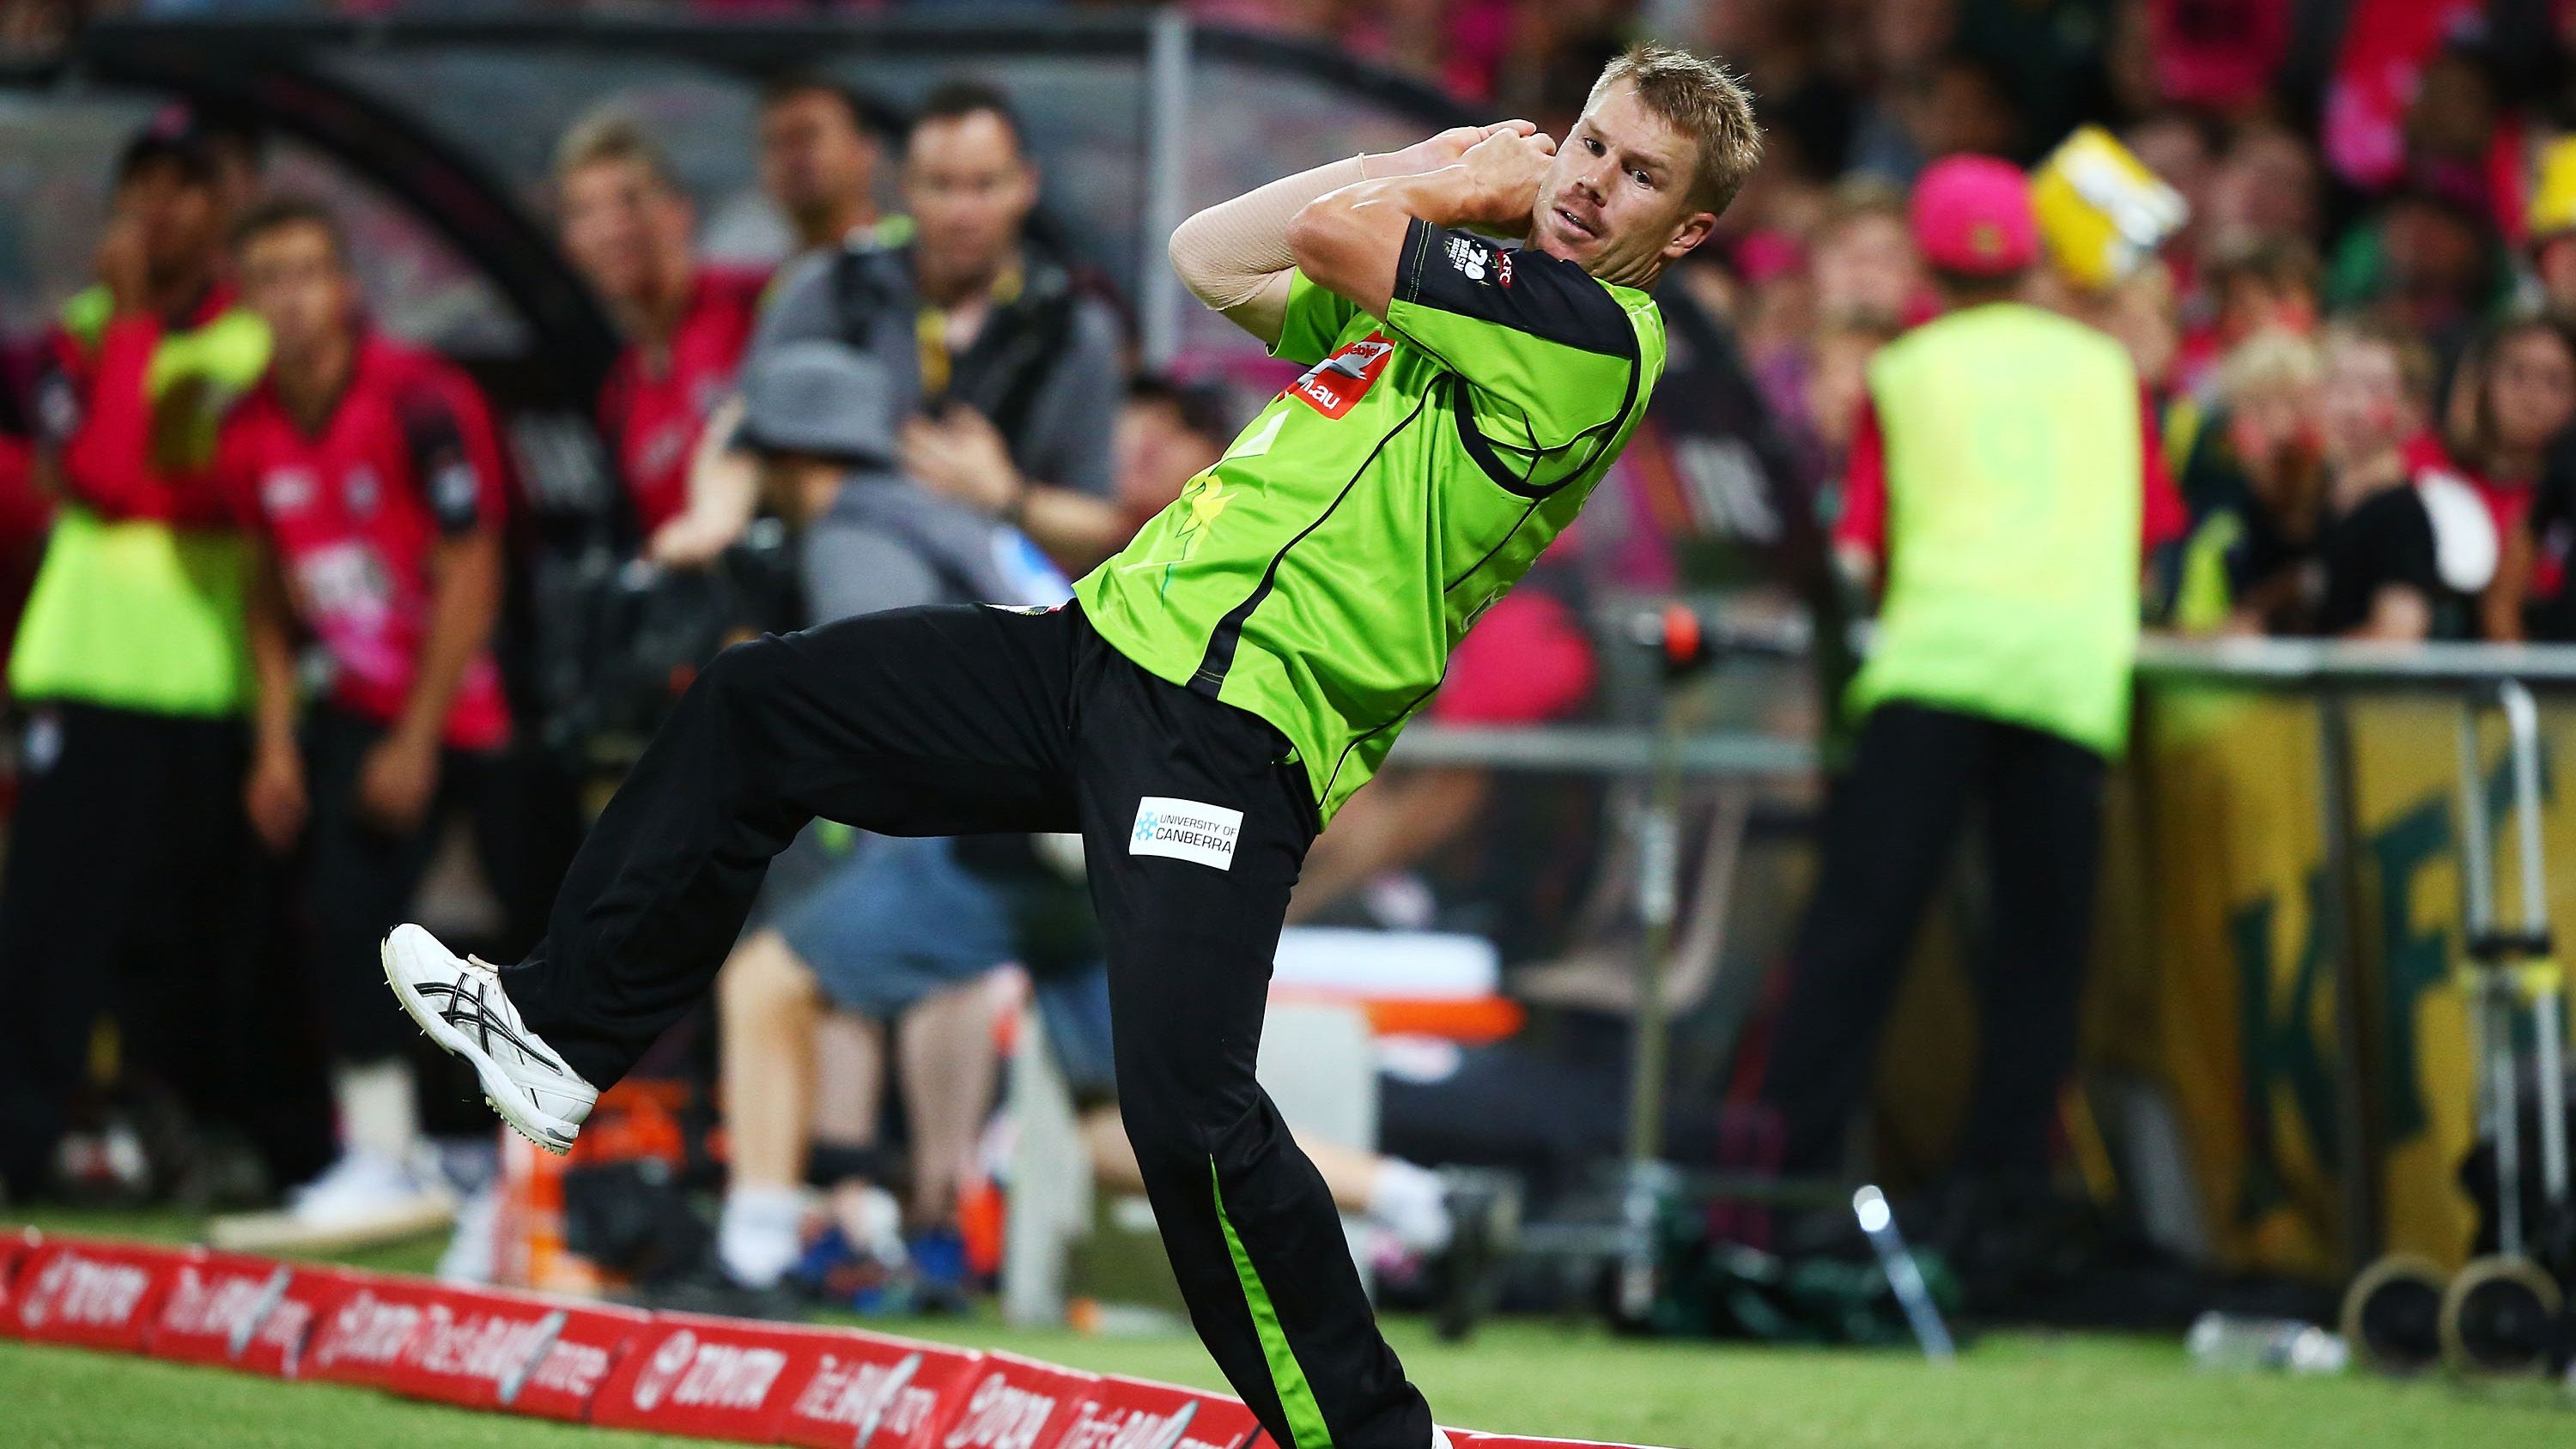 David Warner of the Thunder takes a catch on the boundary to dismiss Michael Lumb of the Sixers during the Big Bash League match between the Sydney Sixers and Sydney Thunder at SCG on December 21, 2013 in Sydney, Australia. (Photo by Matt King/Getty Images)